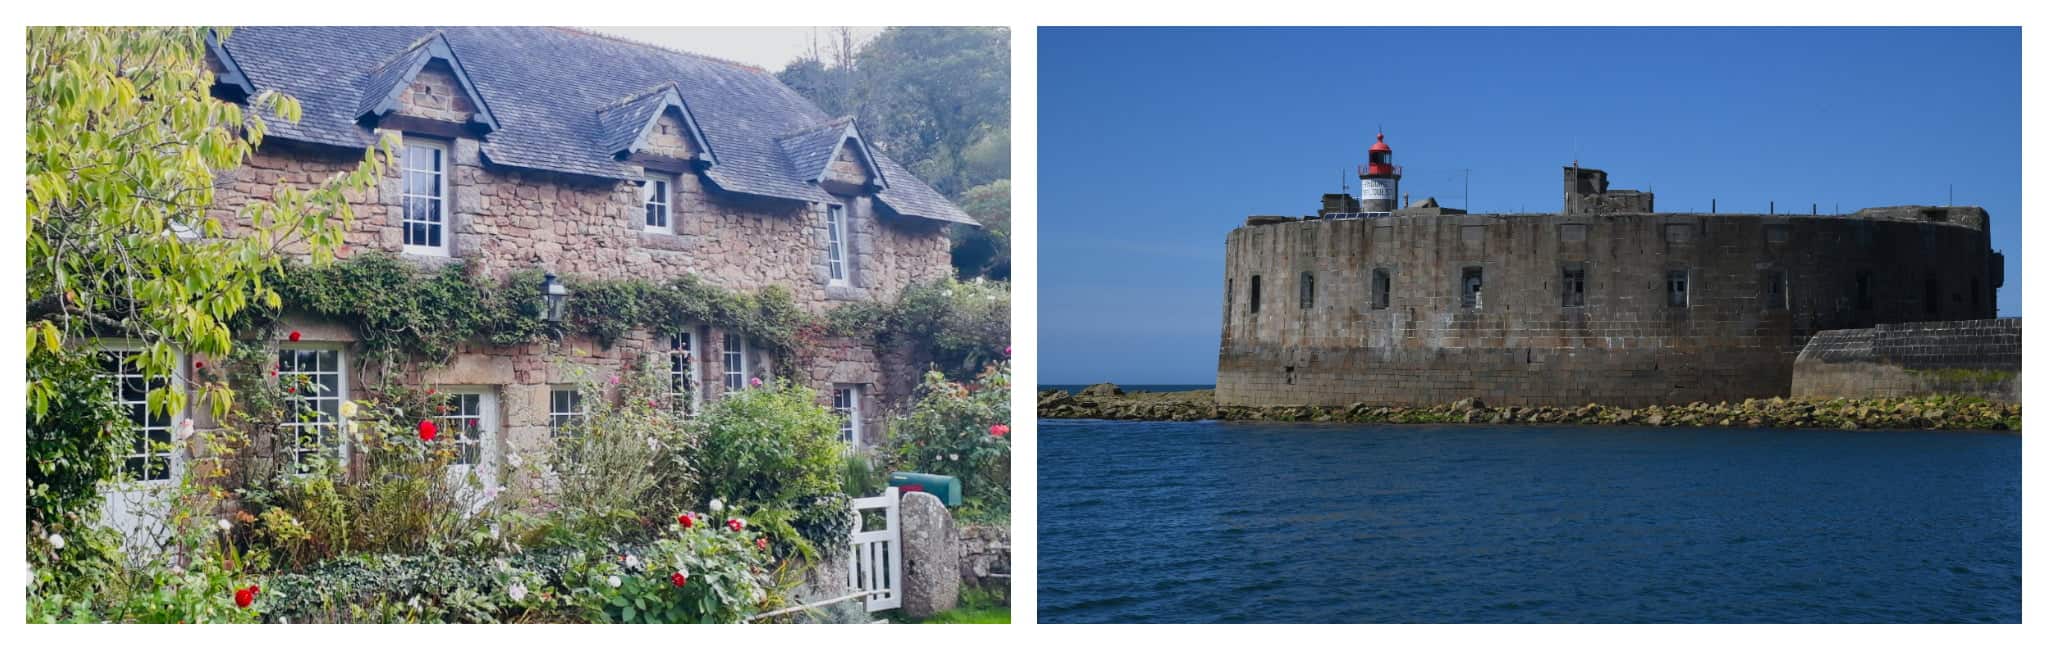 left: a cute French countryhome; right a light house at sea.